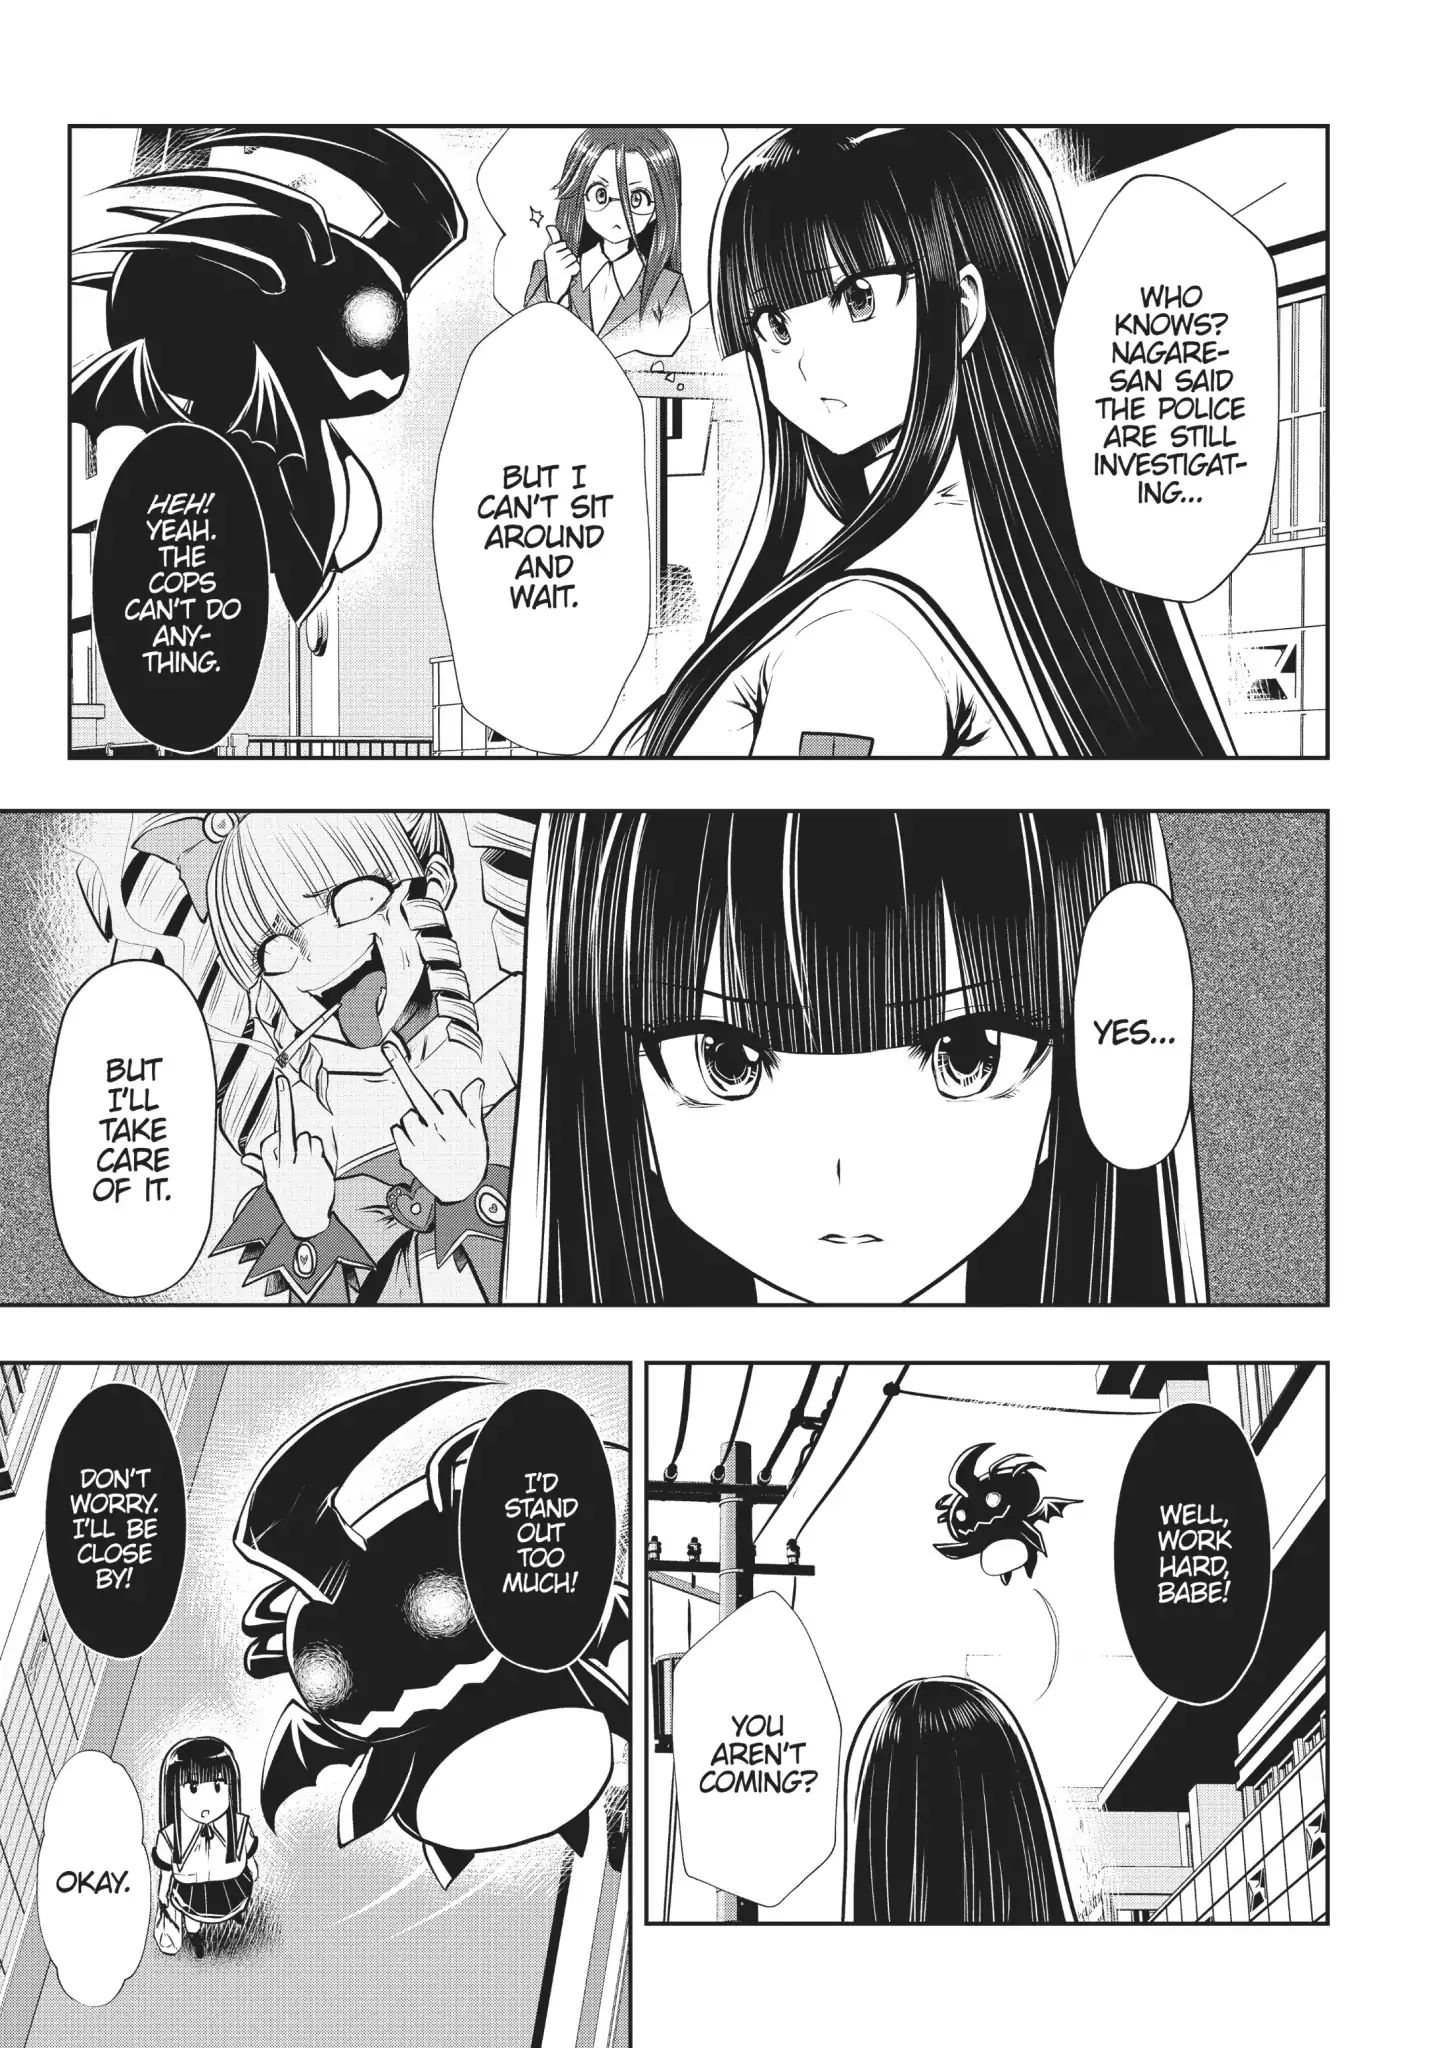 Machimaho: I Messed Up and Made the Wrong Person Into a Magical Girl! - chapter 21 - #4